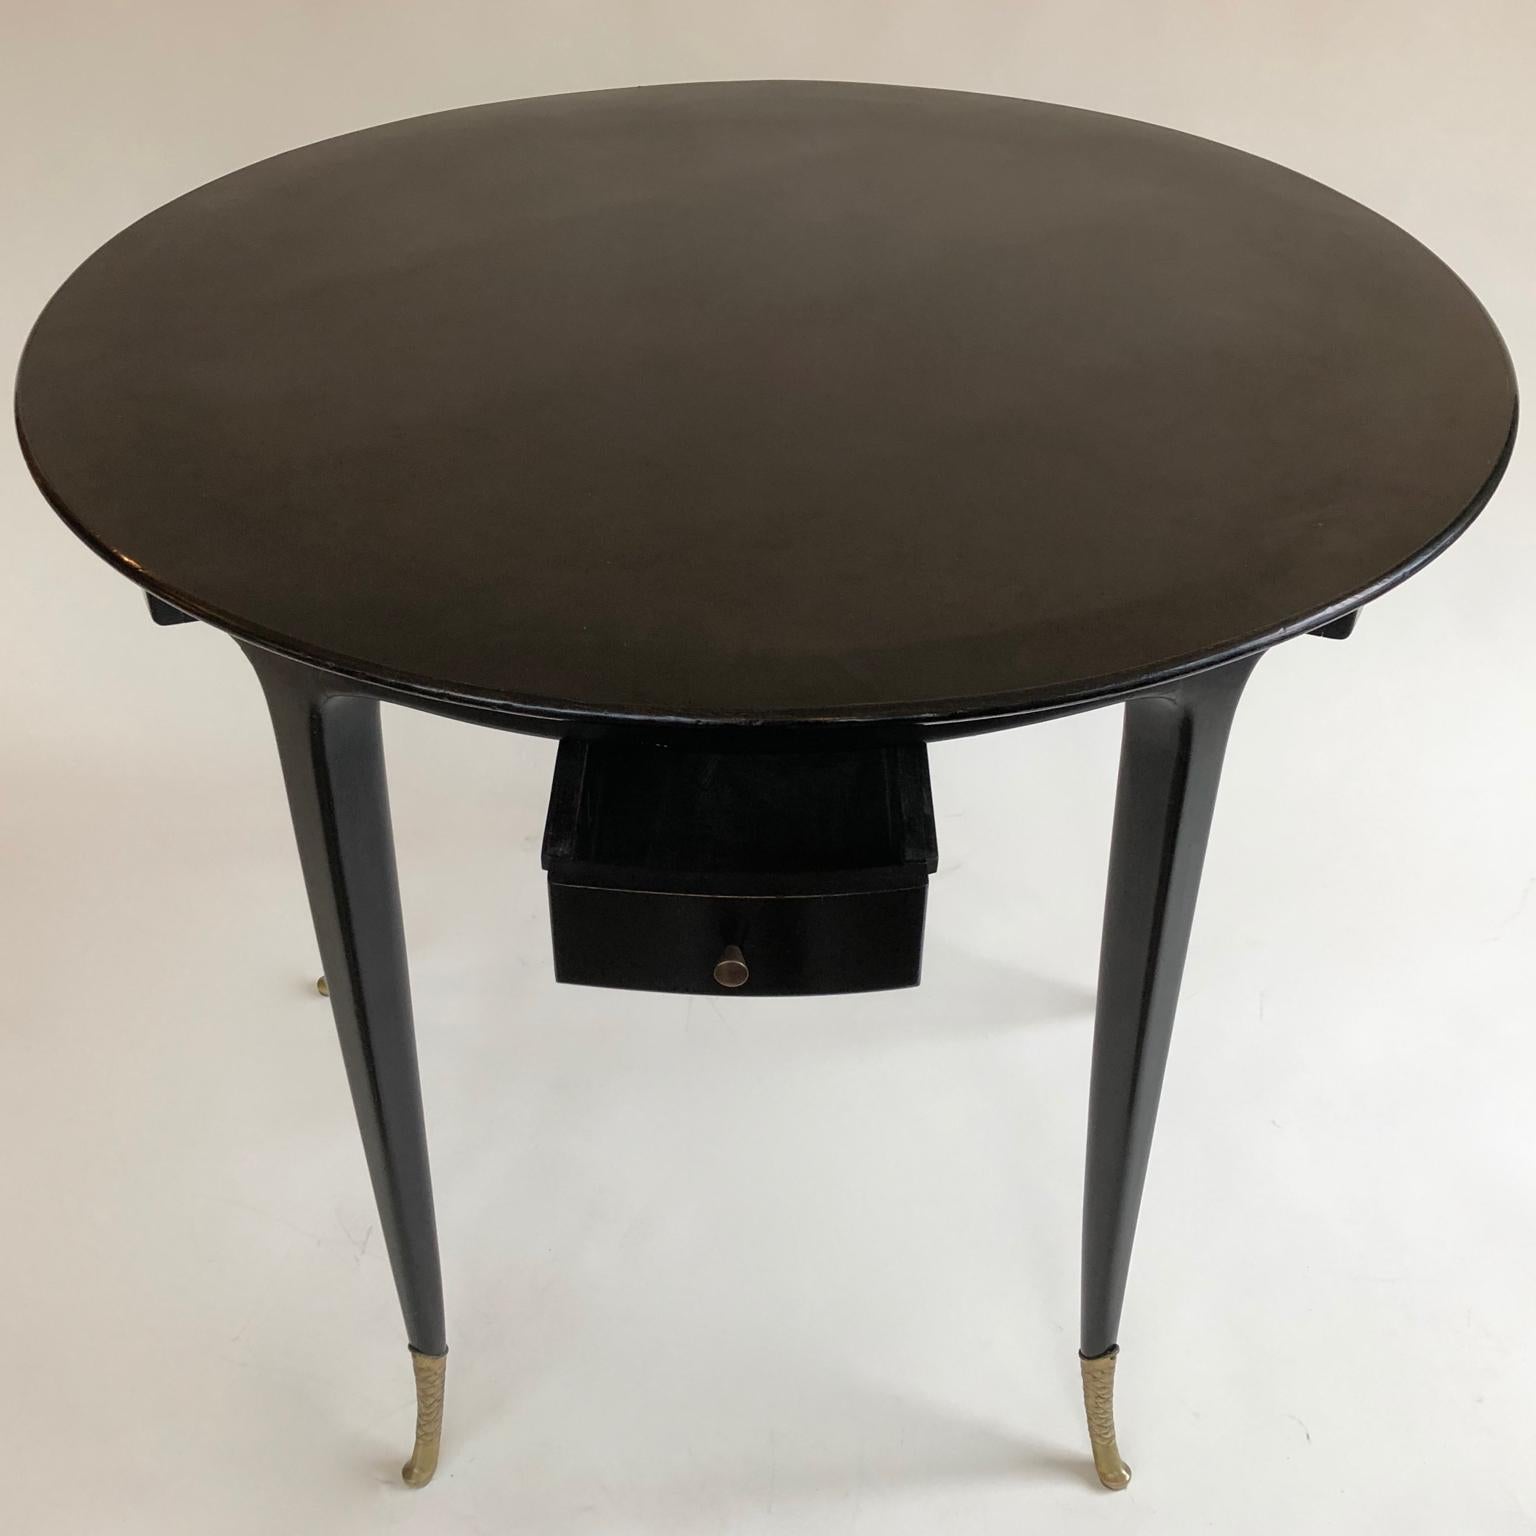 Art Deco 1940s Circular Black Ebonised Italian Games Table with Drawers and Brass Sabots